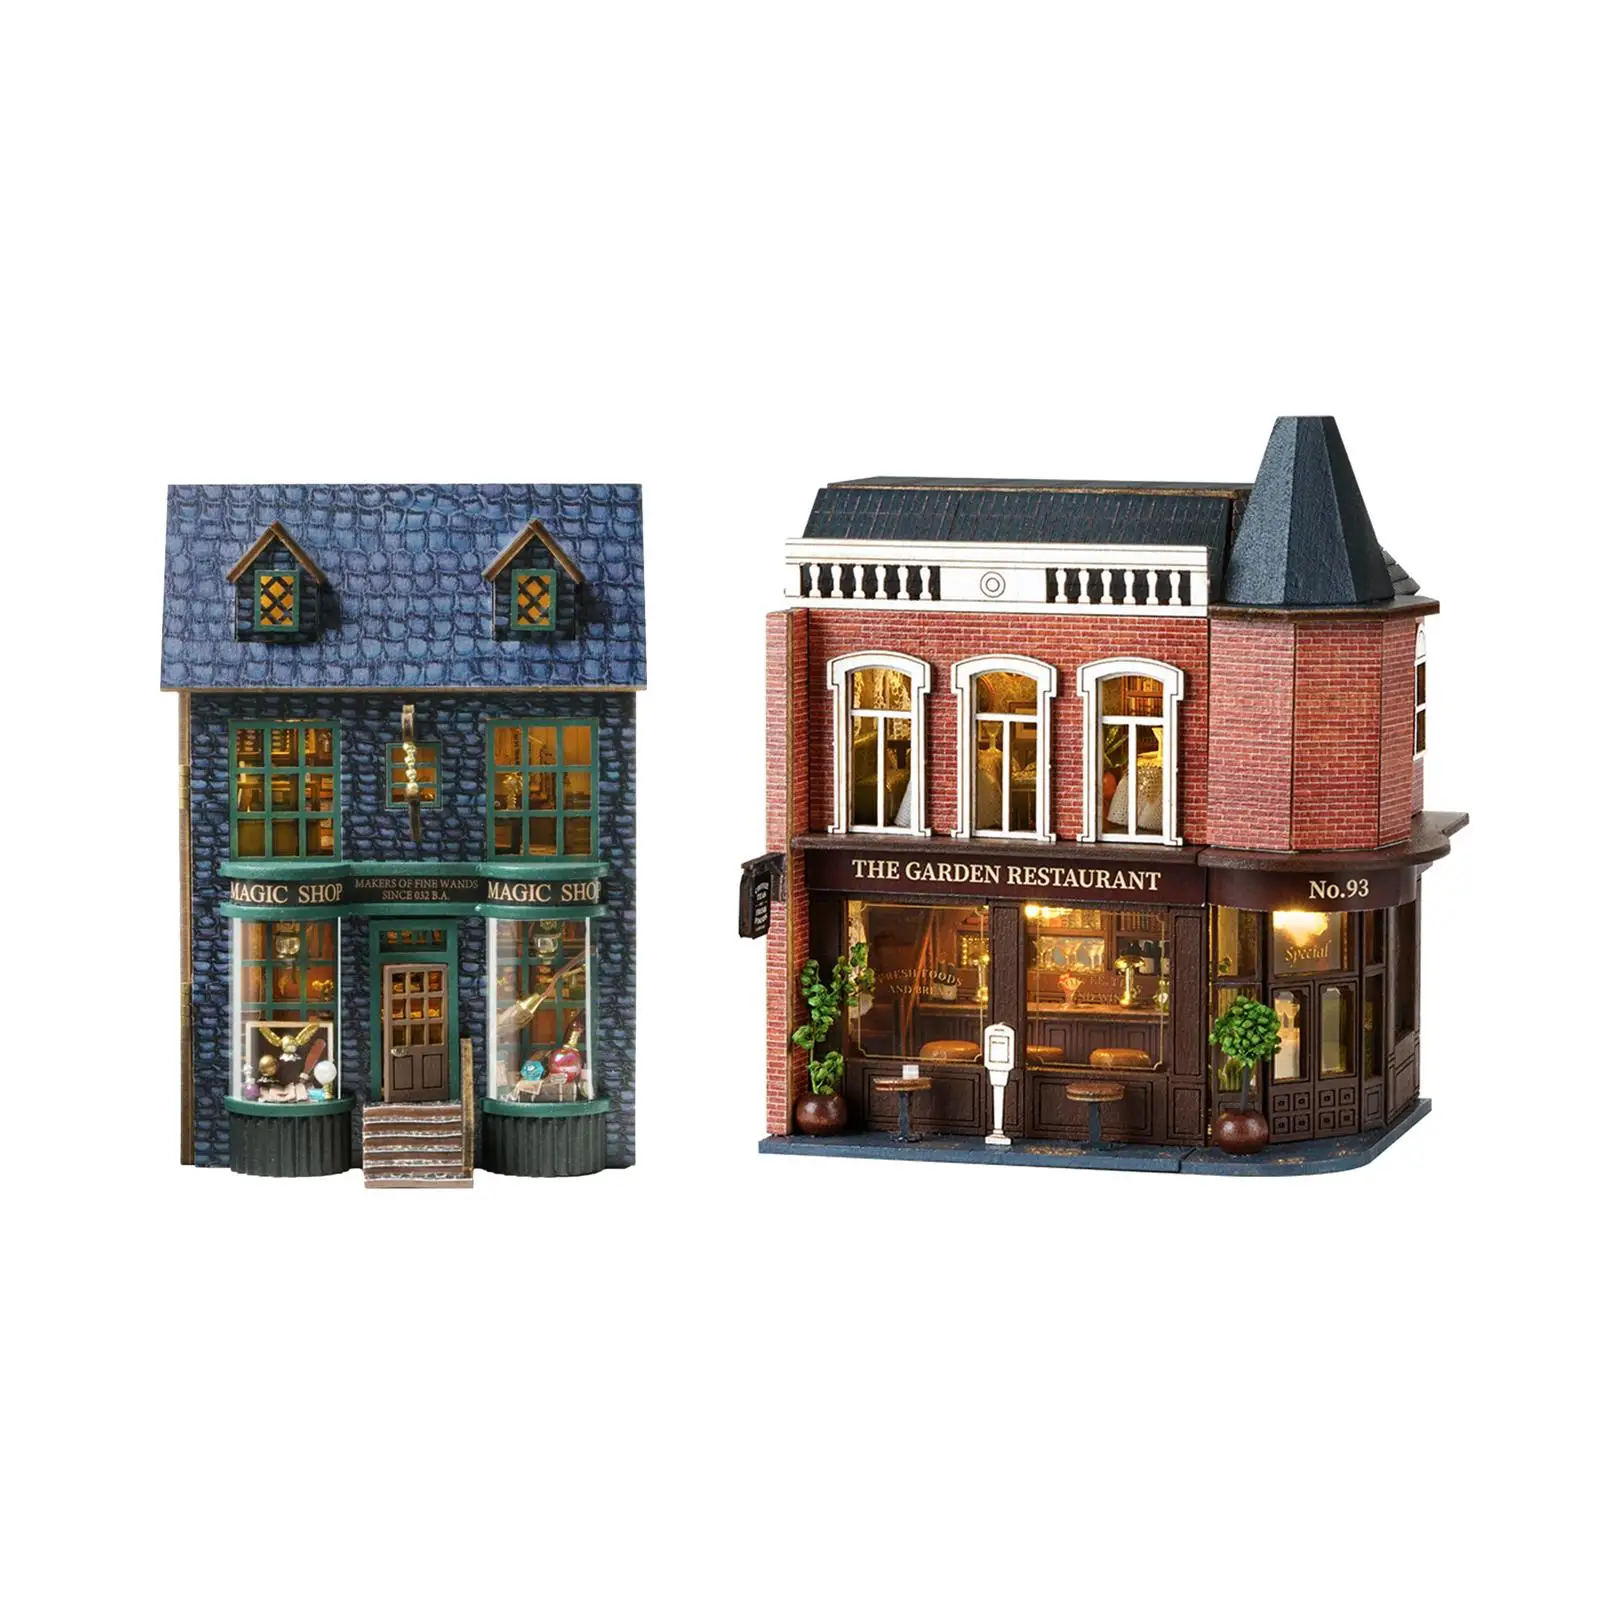 DIY Miniature House s Educational Toy for Boy Girls Teens Birthday Gifts